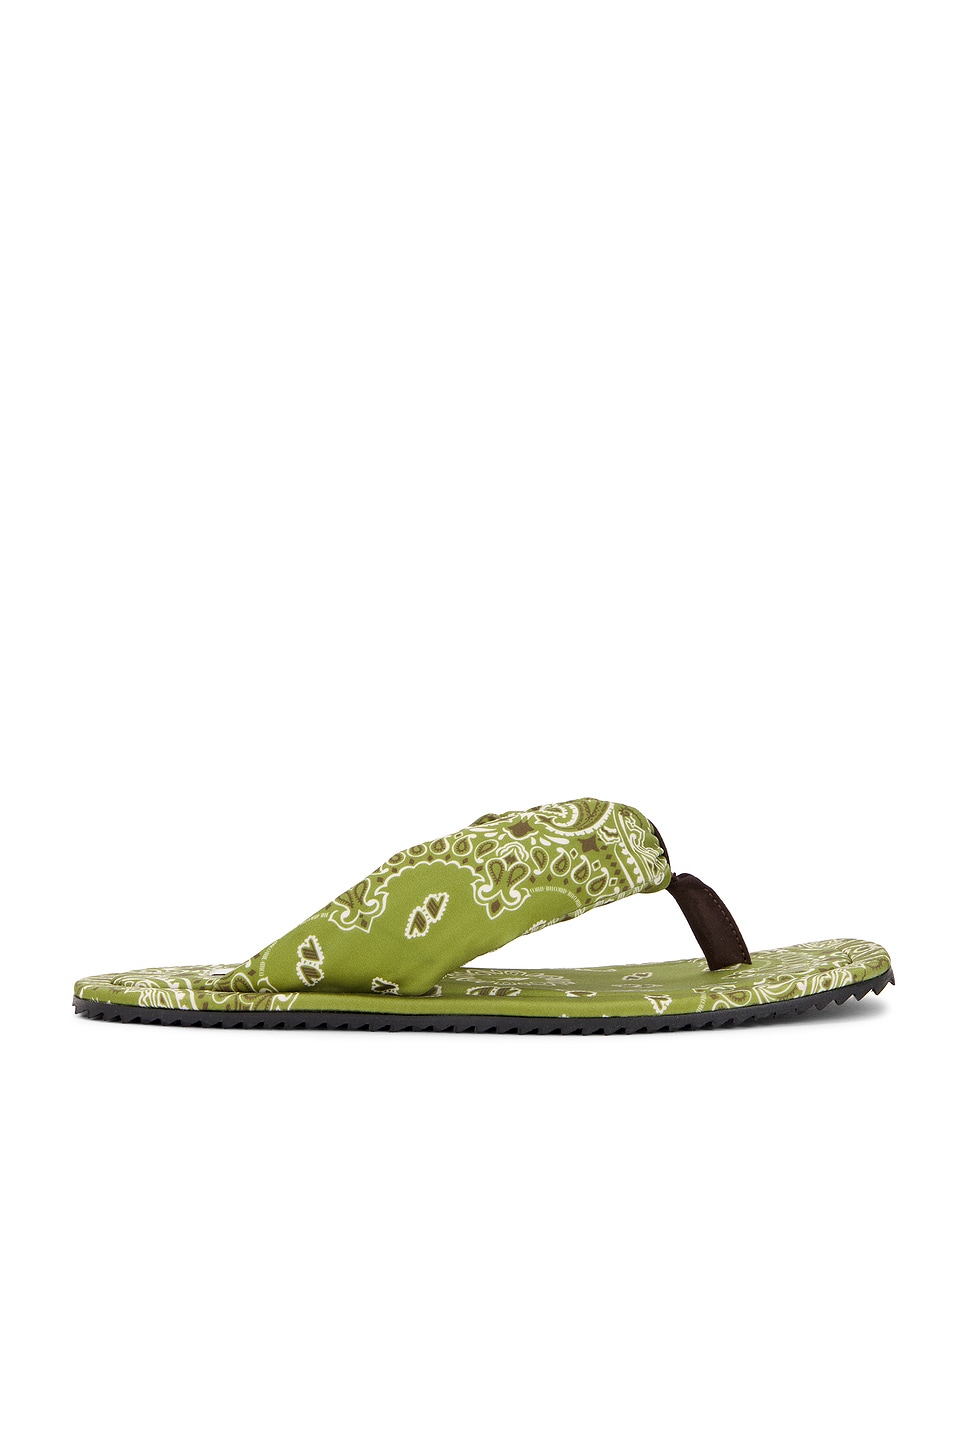 Image 1 of THE ATTICO Flip Flop Sandal in Green, Military Green, & White